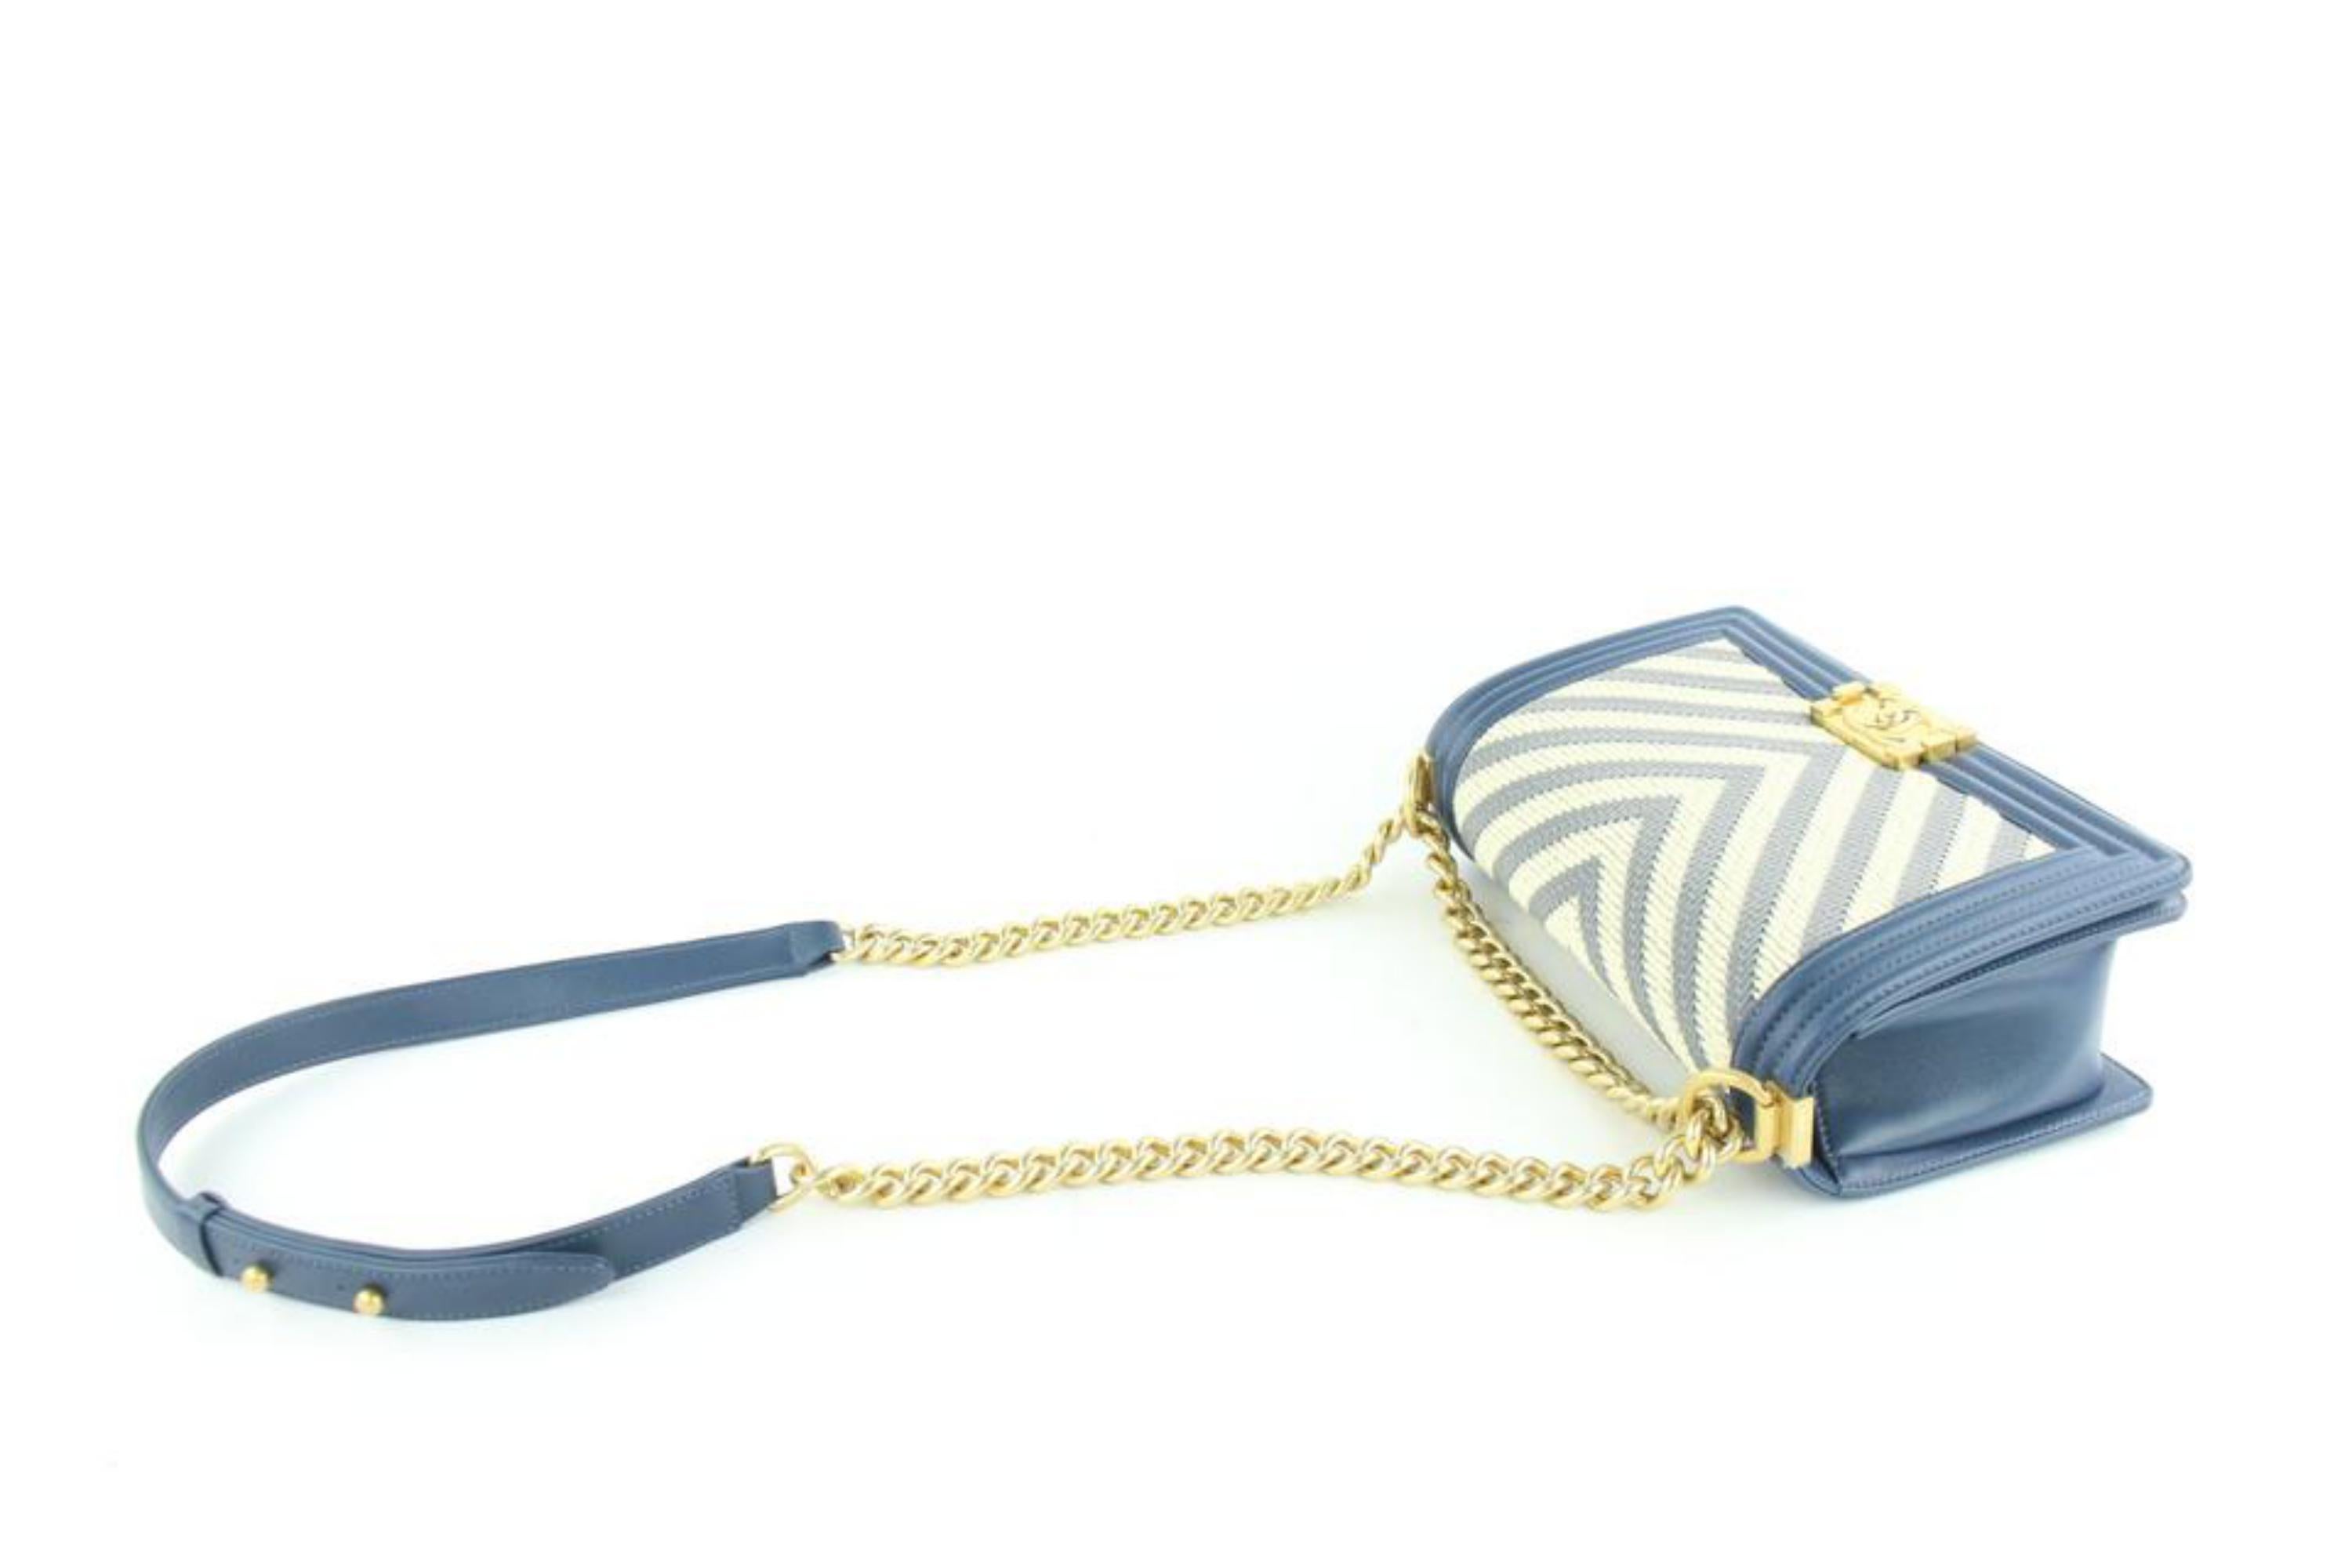 Chanel Boy (Rare) Limited Edition Chevron 2cz1812 Blue Leather Cross Body Bag For Sale 1